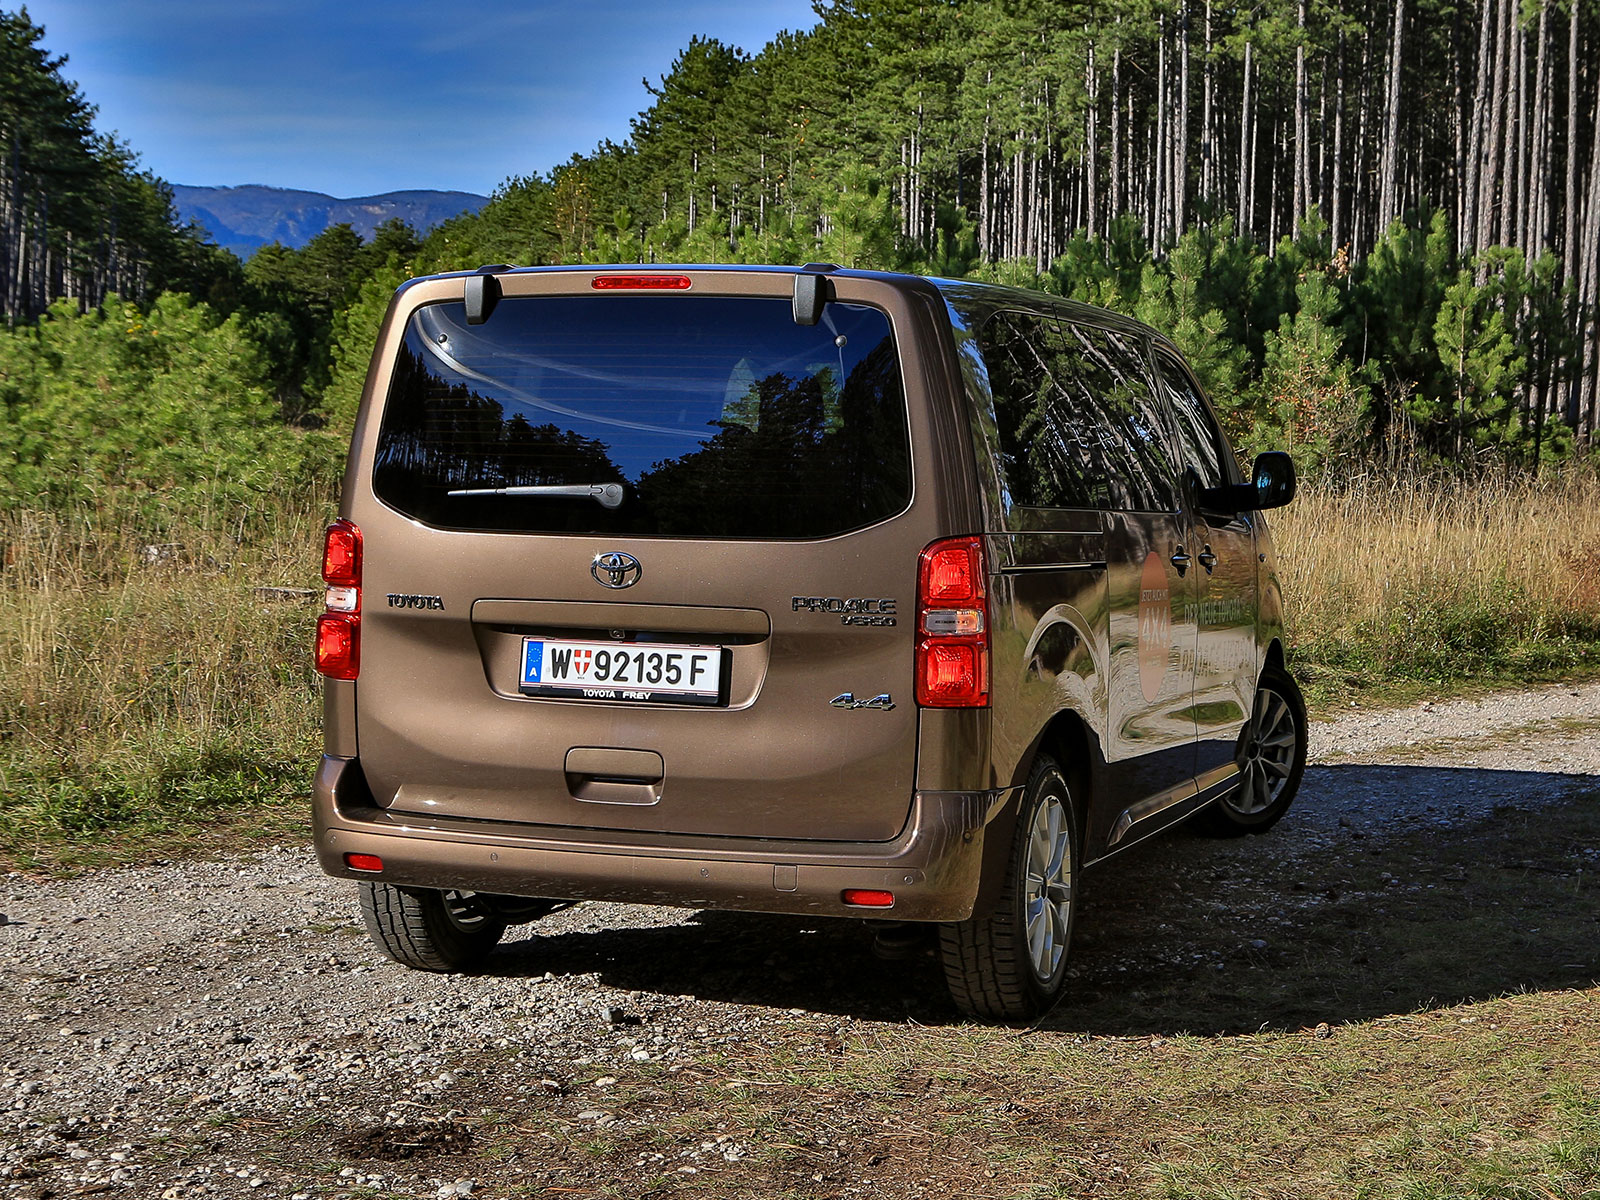 Toyota Proace Verso L1 Family 4x4 Test